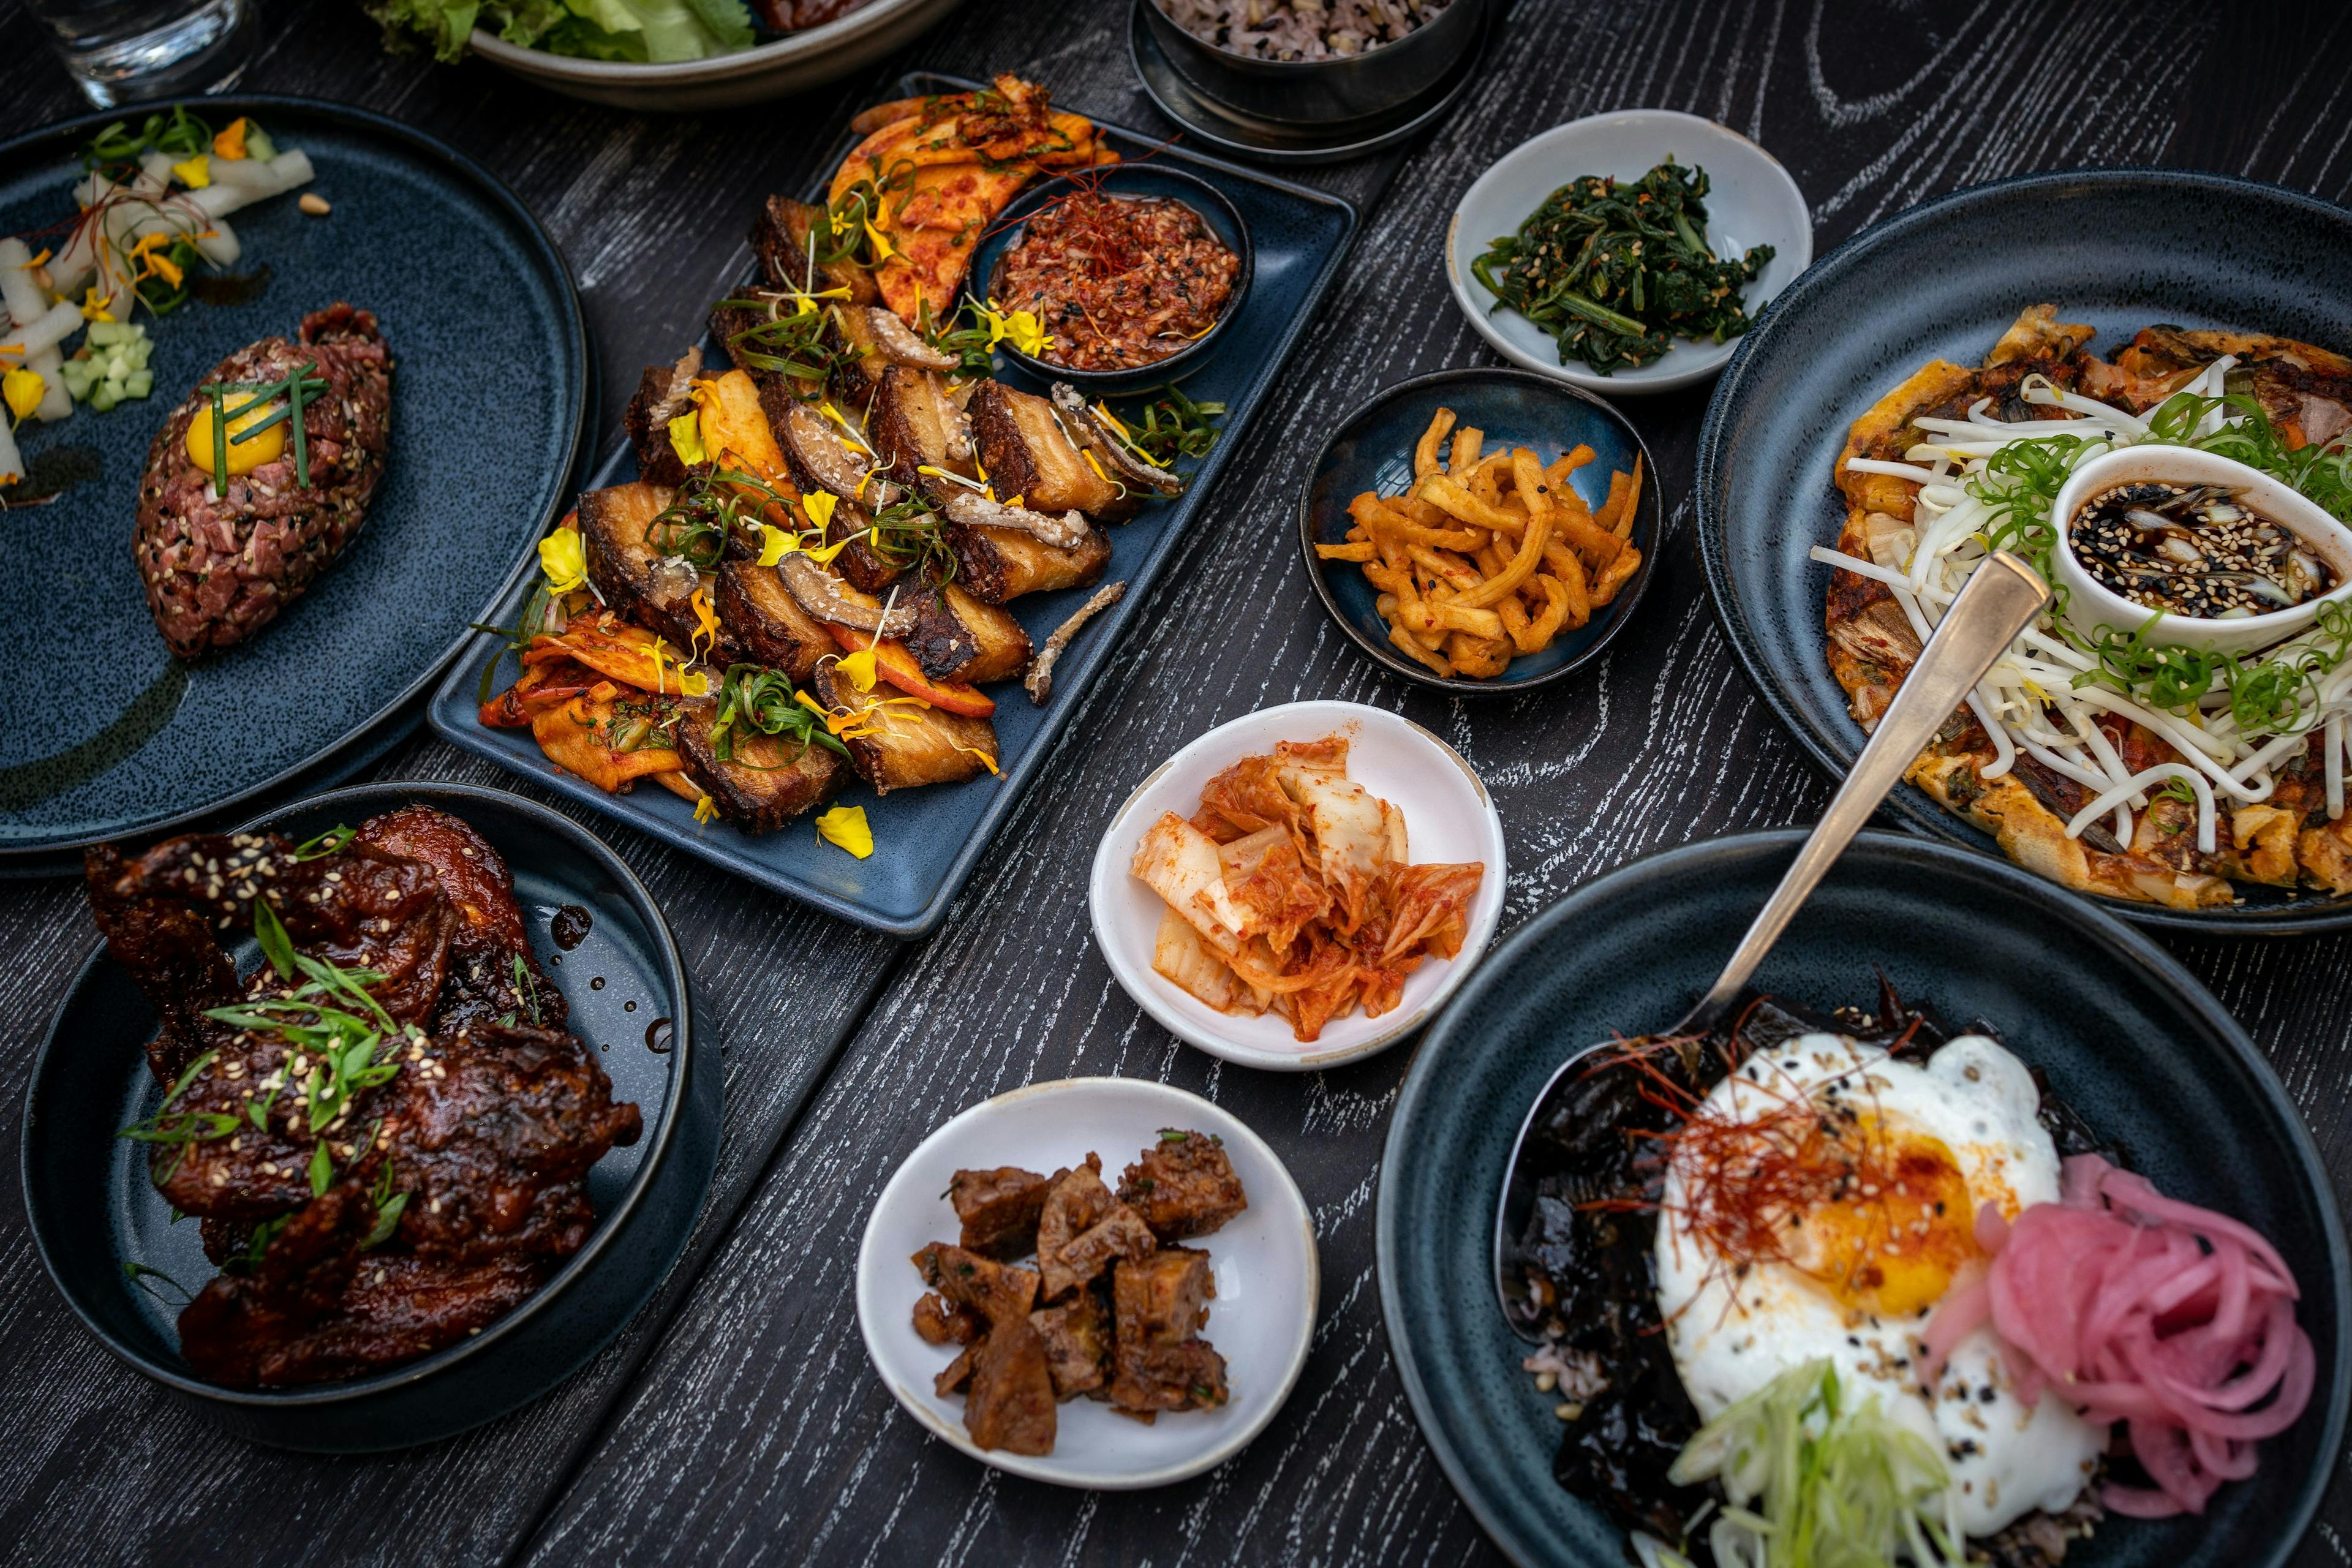 Selection of Korean food on the table